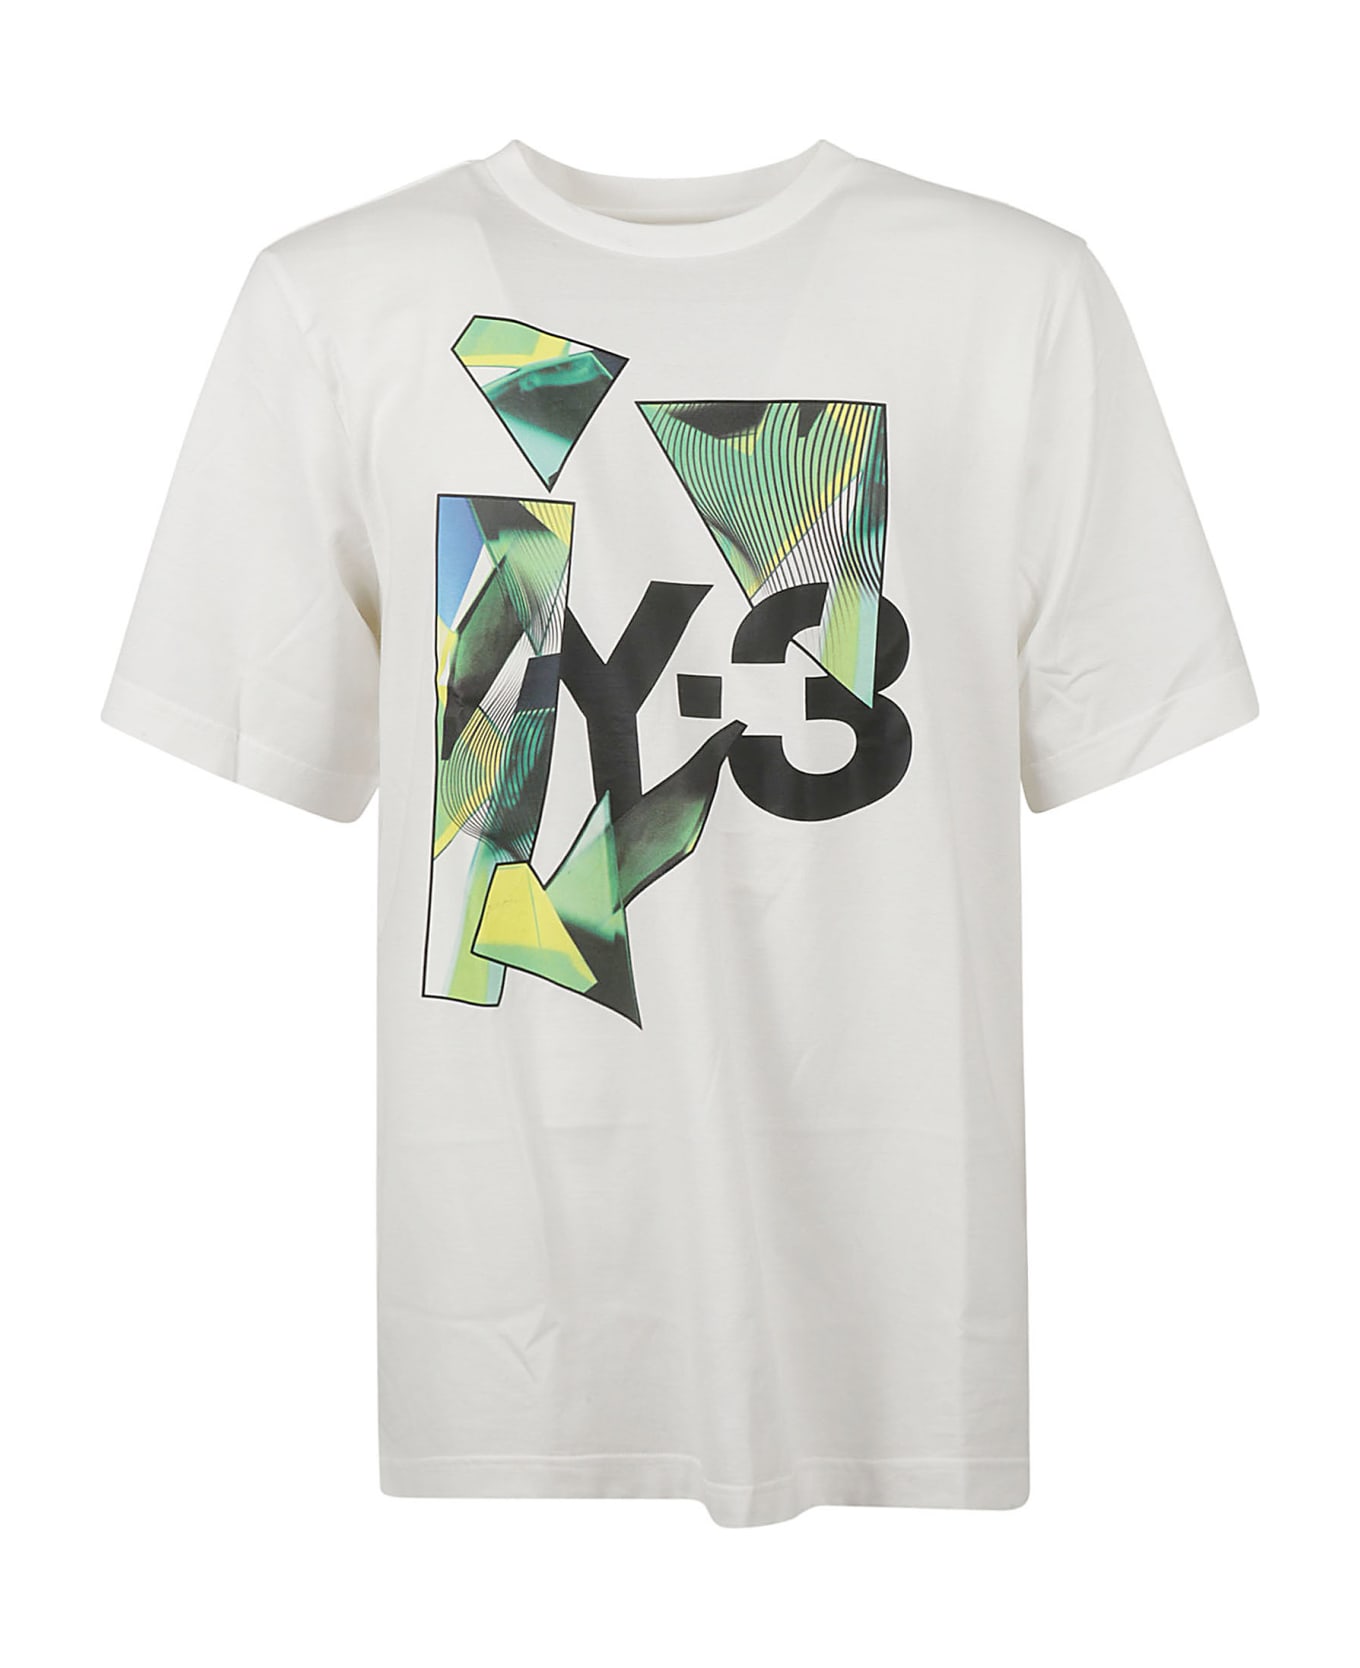 Y-3 Graphic Ss T-shirt - White/Multicolor